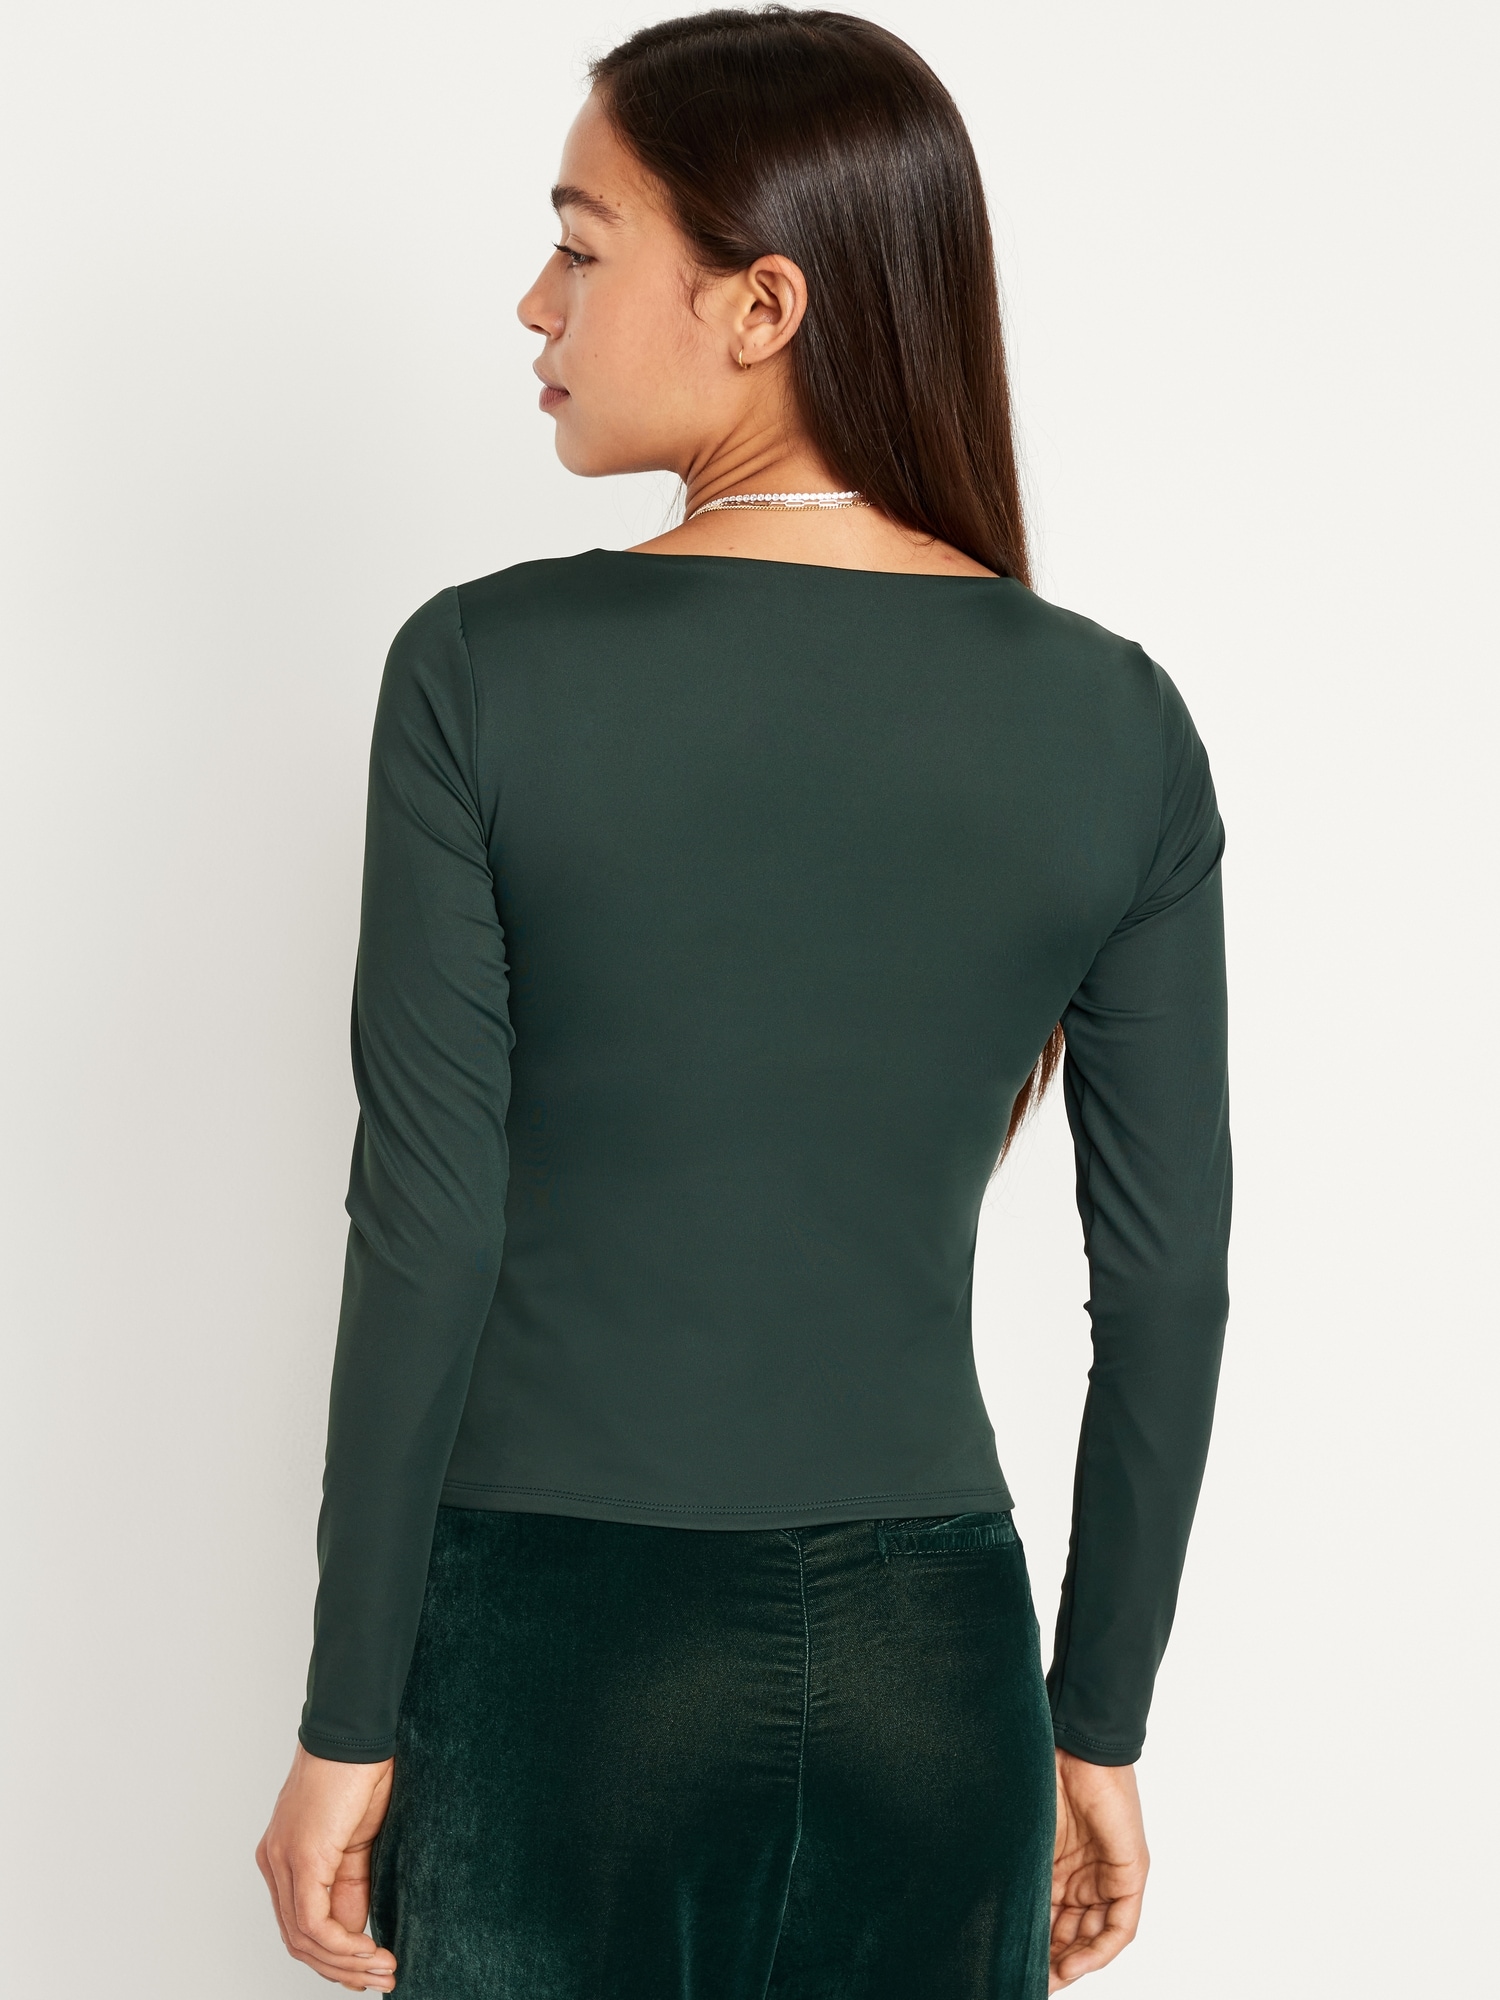 Ivyrevel long sleeve cutout top in black